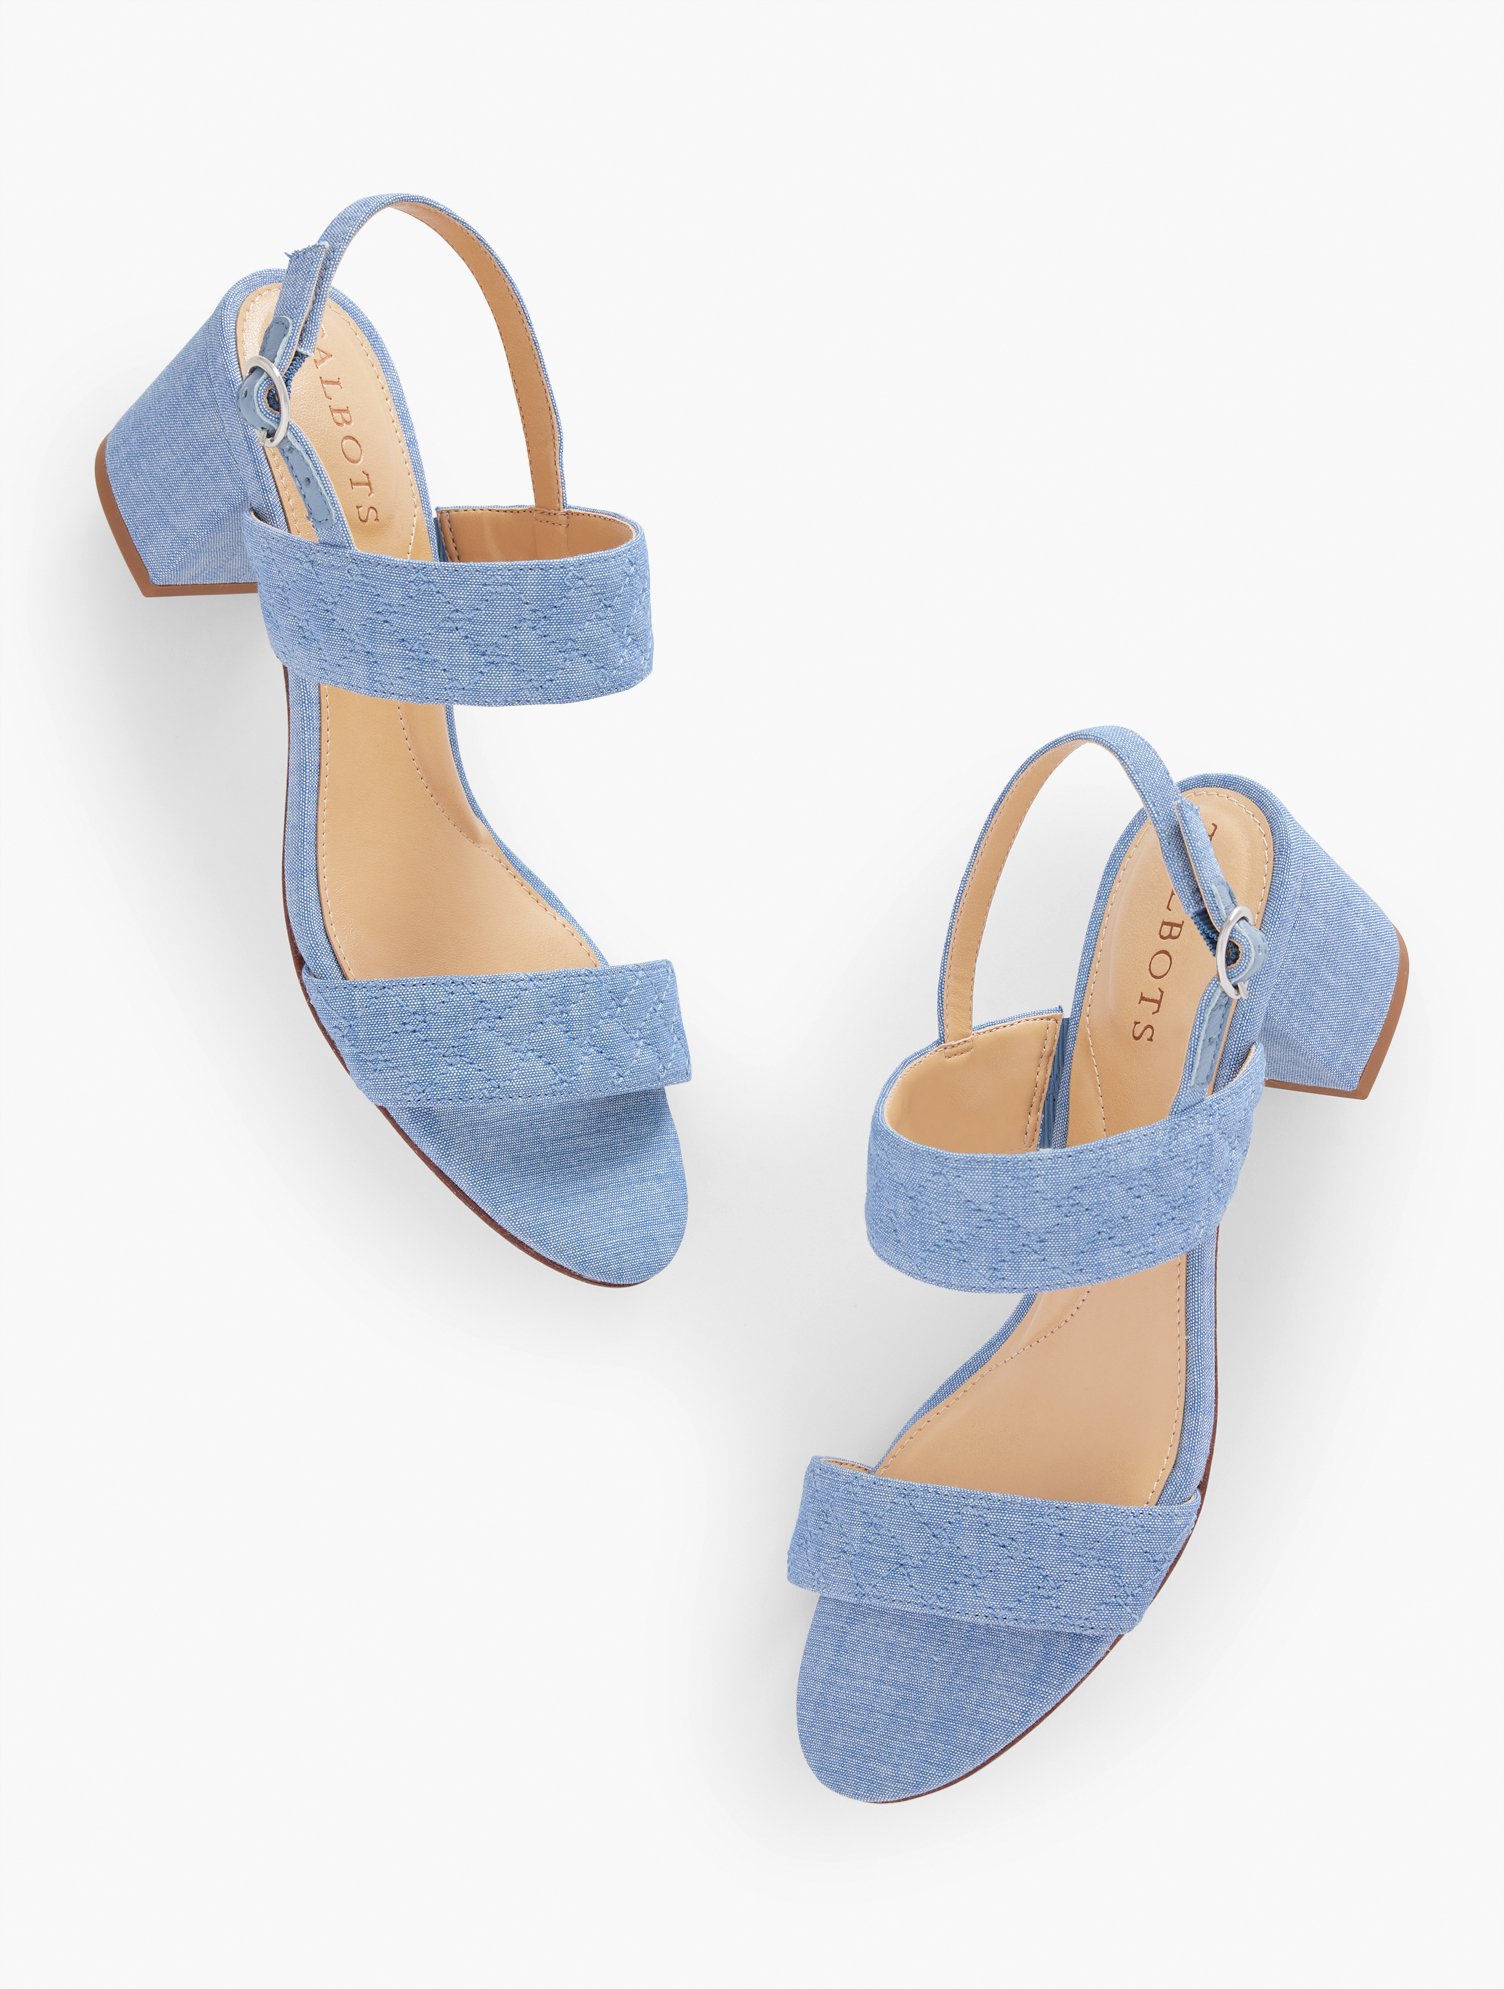 Talbots Mimi Quilted Sandals - Chambray - Light Blue - 10 1/2 M - 100% Cotton